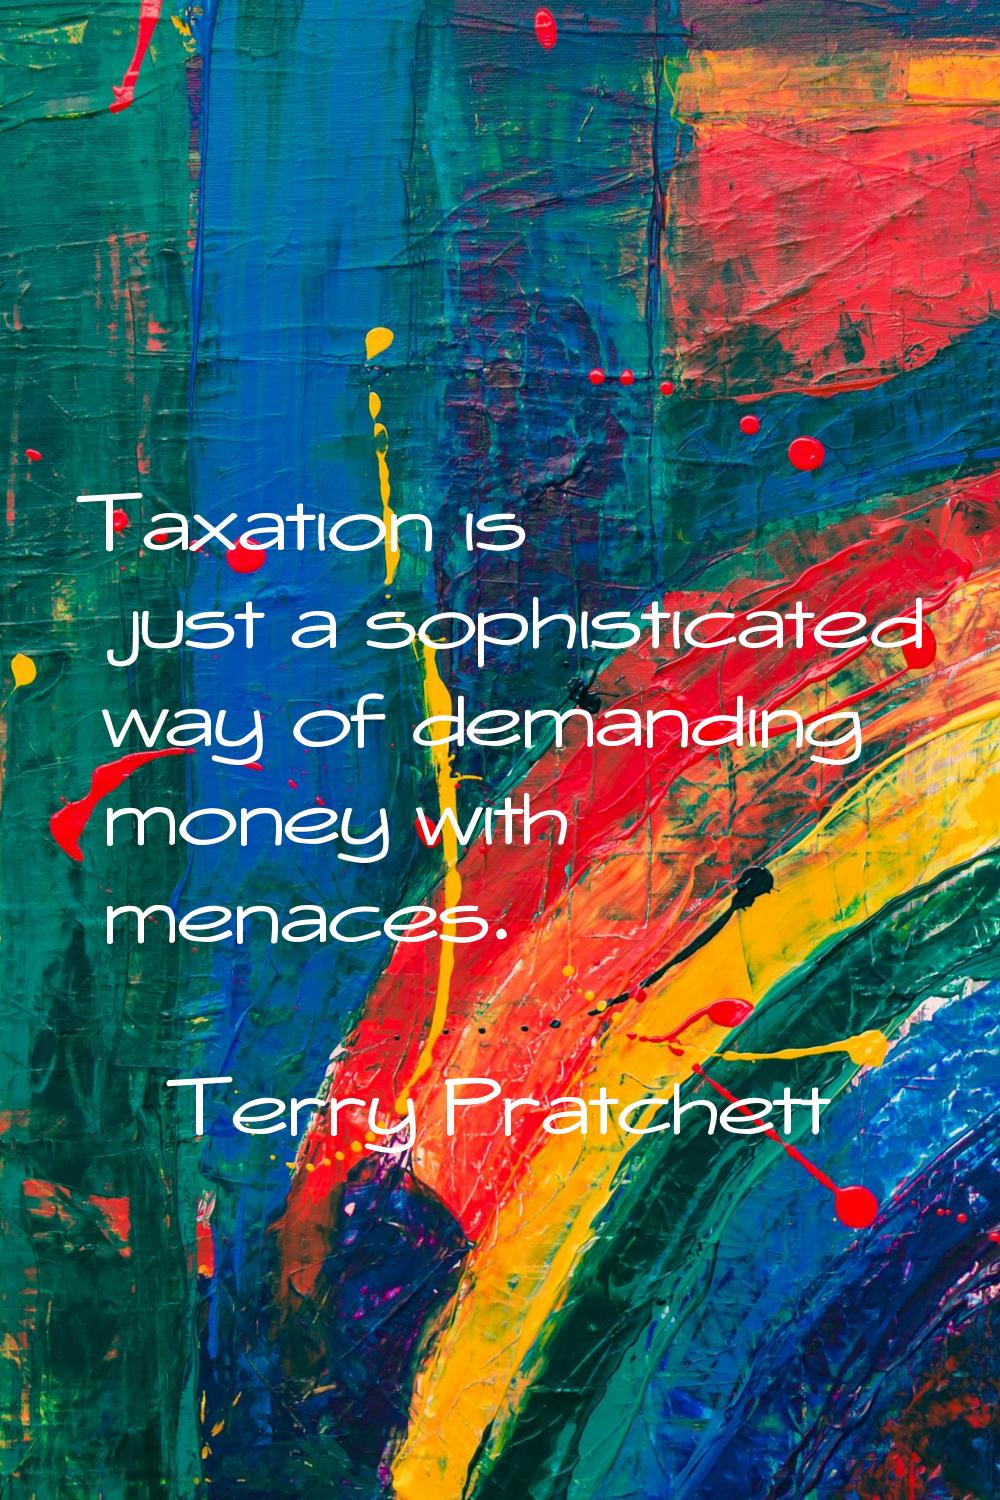 Taxation is just a sophisticated way of demanding money with menaces.